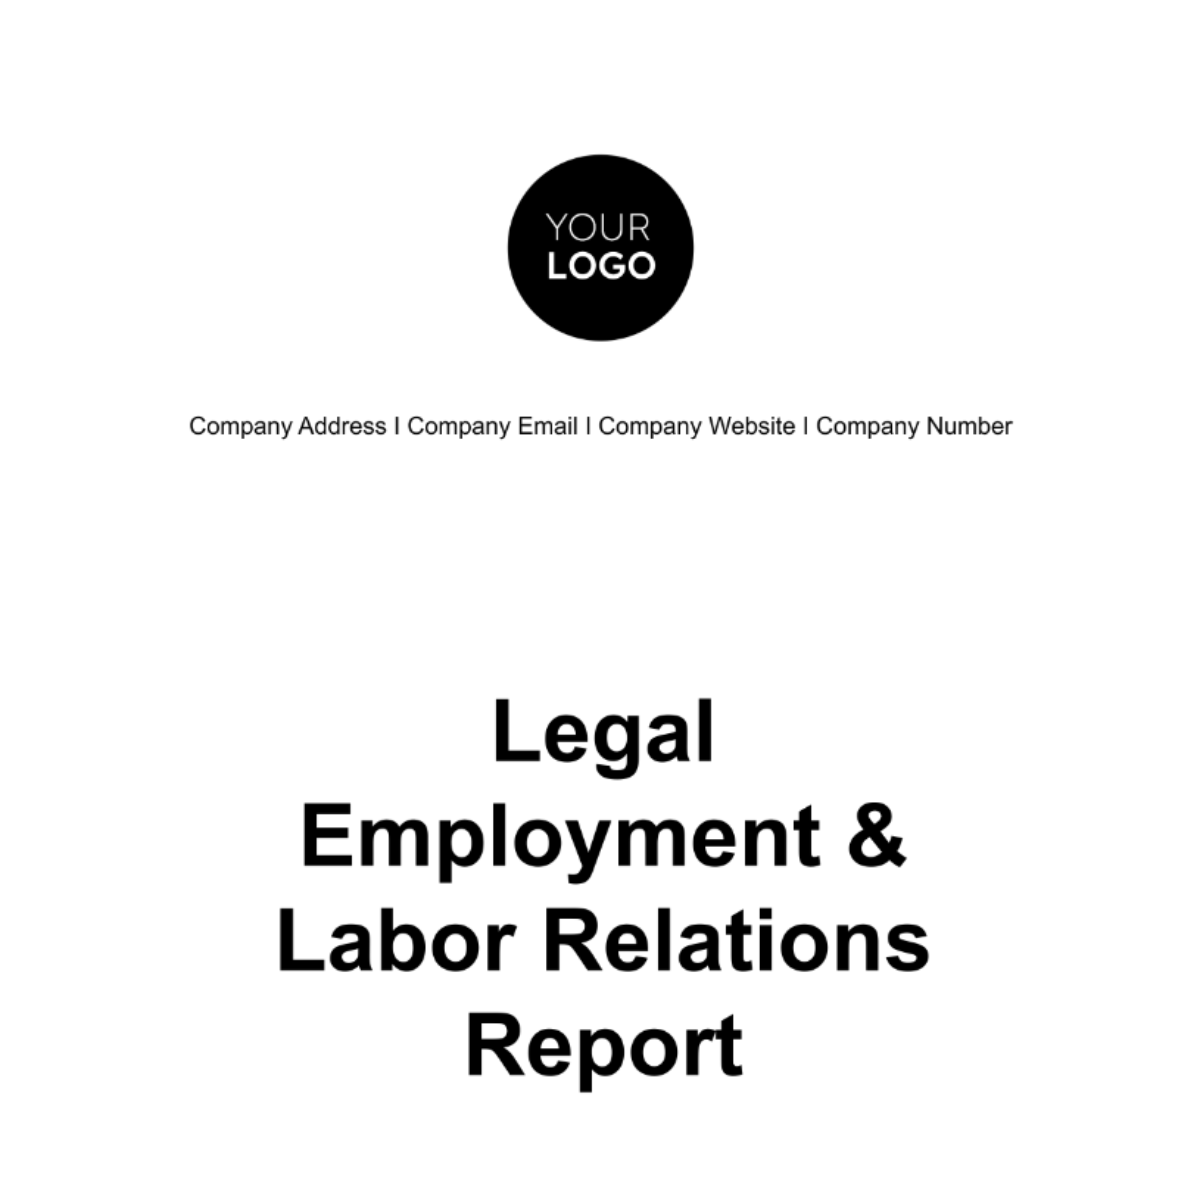 Free Legal Employment & Labor Relations Report Template